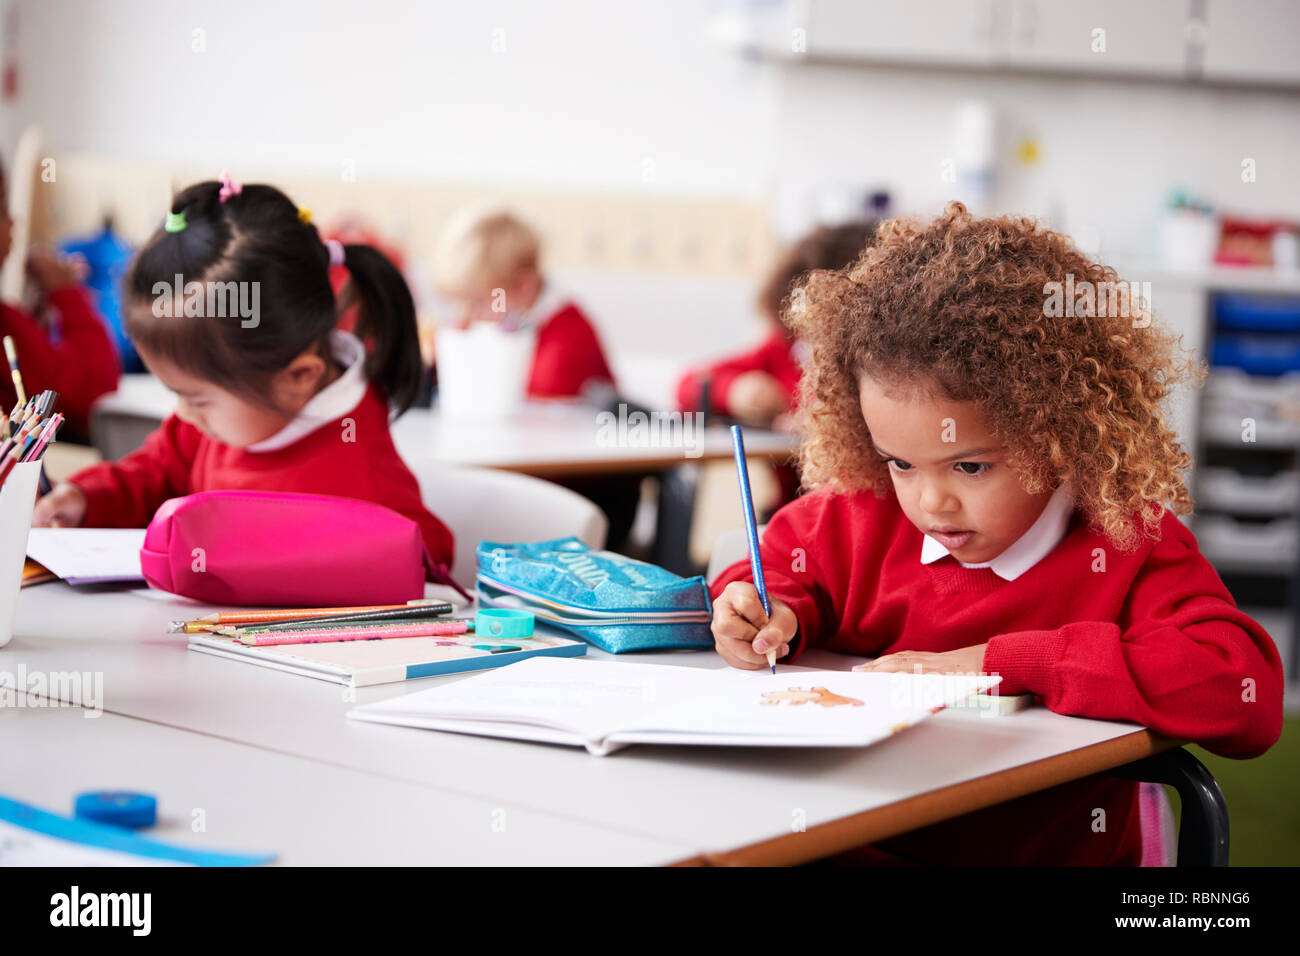 Young schoolgirl wearing school uniform sitting at a desk in an infant school classroom drawing, close up Stock Photo